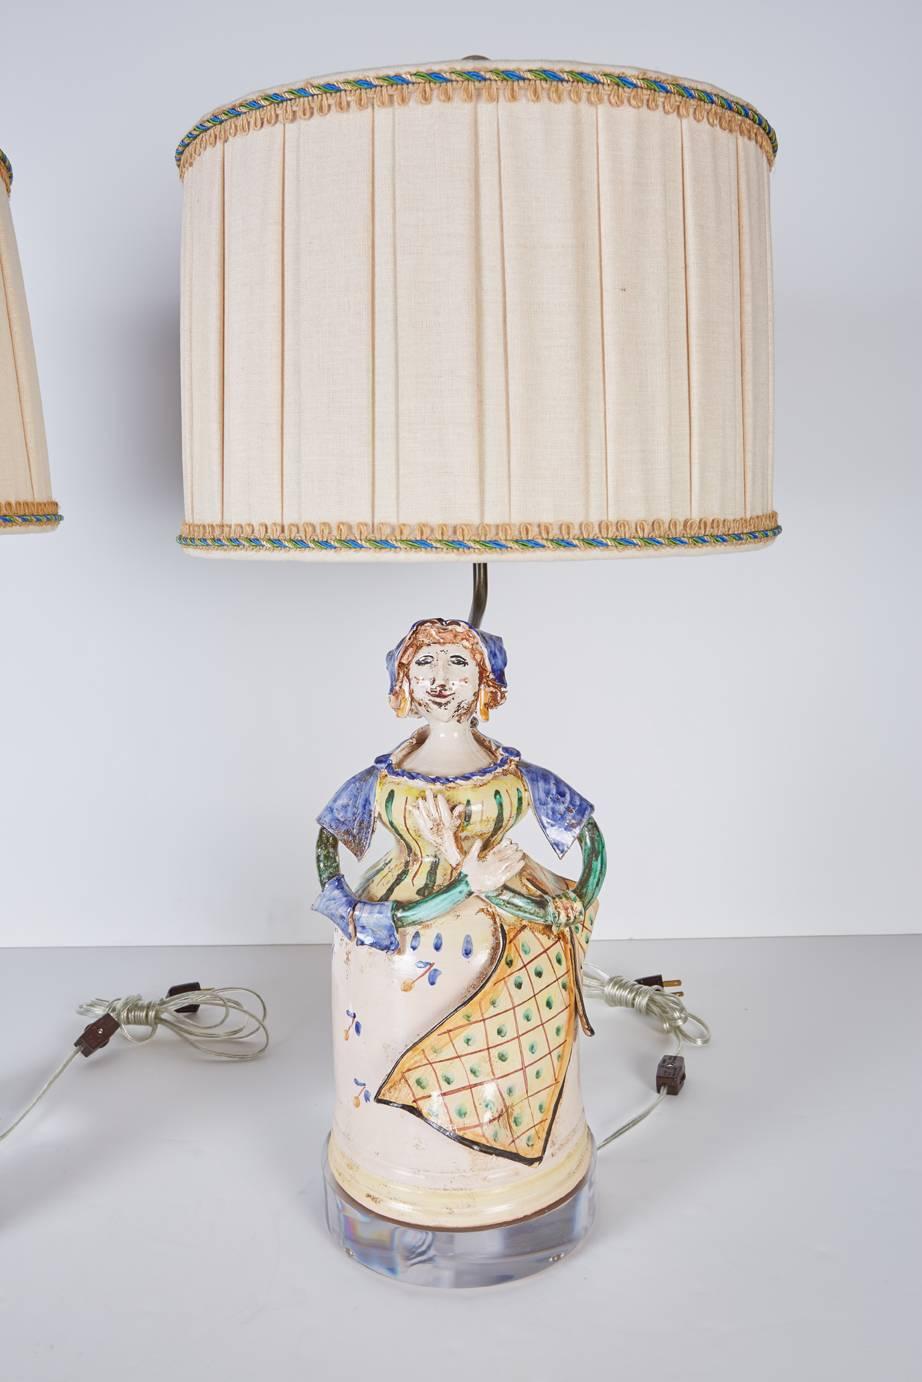 A pair of Italian midcentury figures mounted as lamps with custom Lucite bases and custom box pleated natural colored linen shades trimmed in twisted blue, green, and tan cording resting on a natural linen looped gimp.